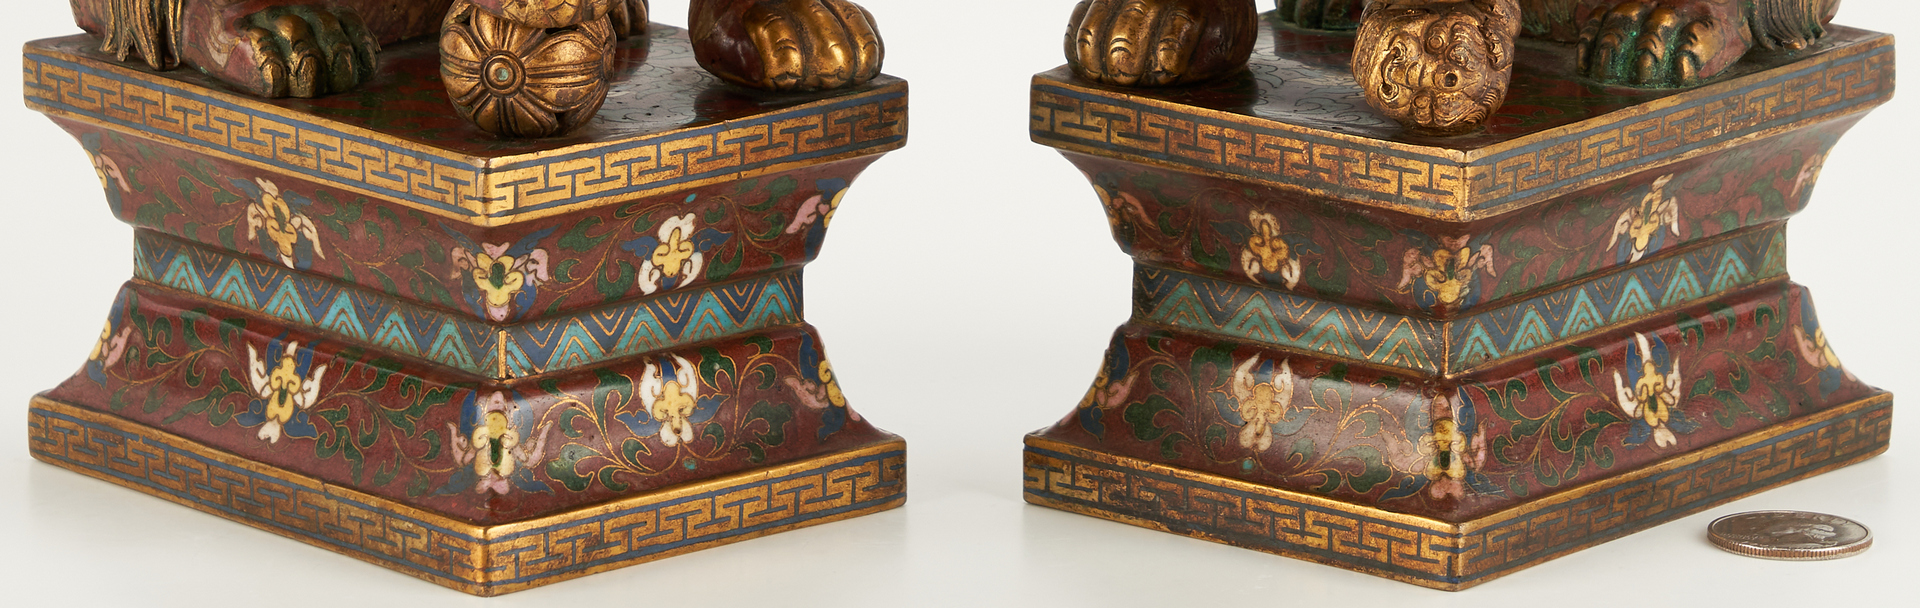 Lot 27: Chinese Cloisonne Immortal Figure & Temple Lions, 3 items